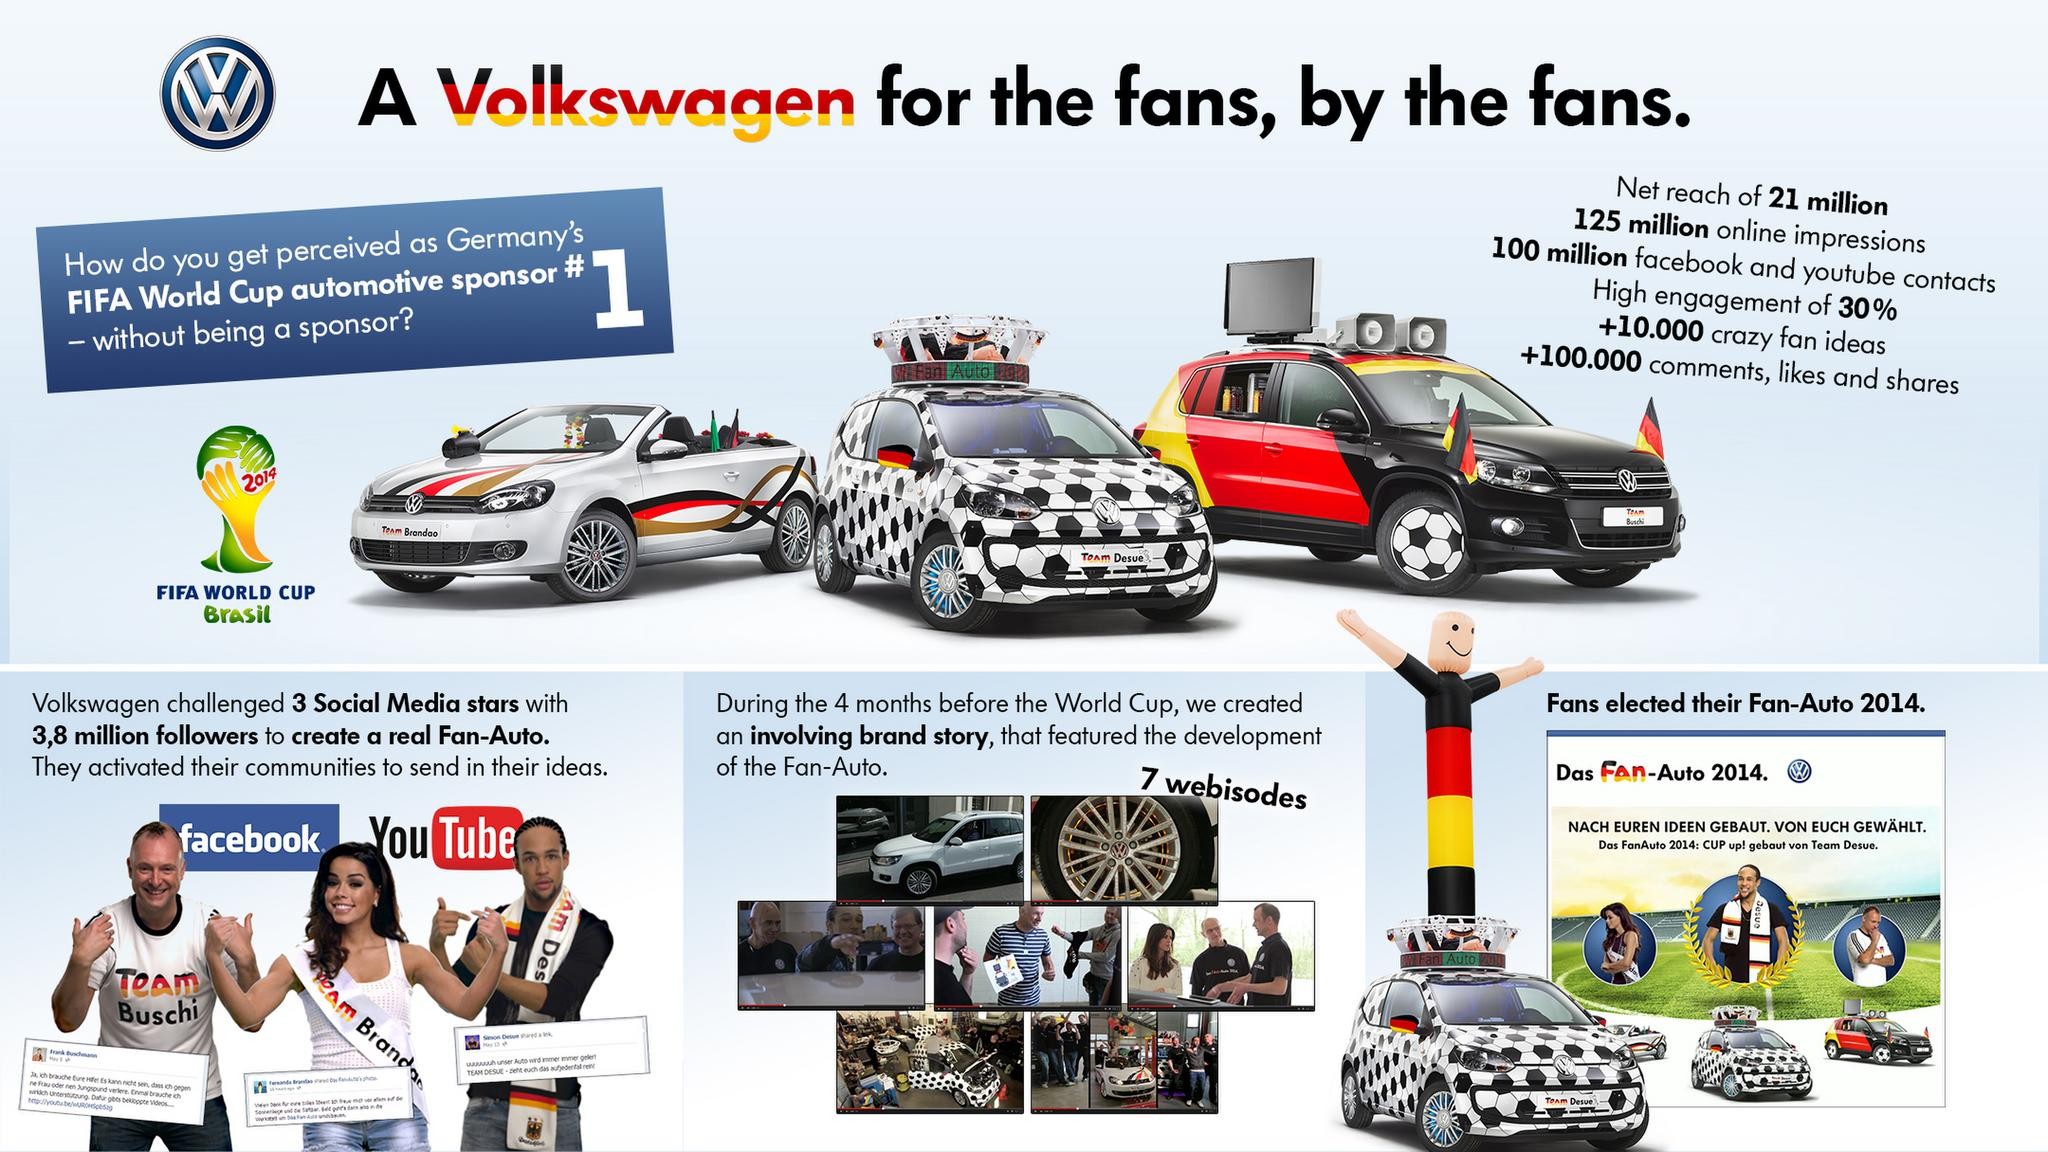 A VOLKSWAGEN FOR THE FANS, BY THE FANS!